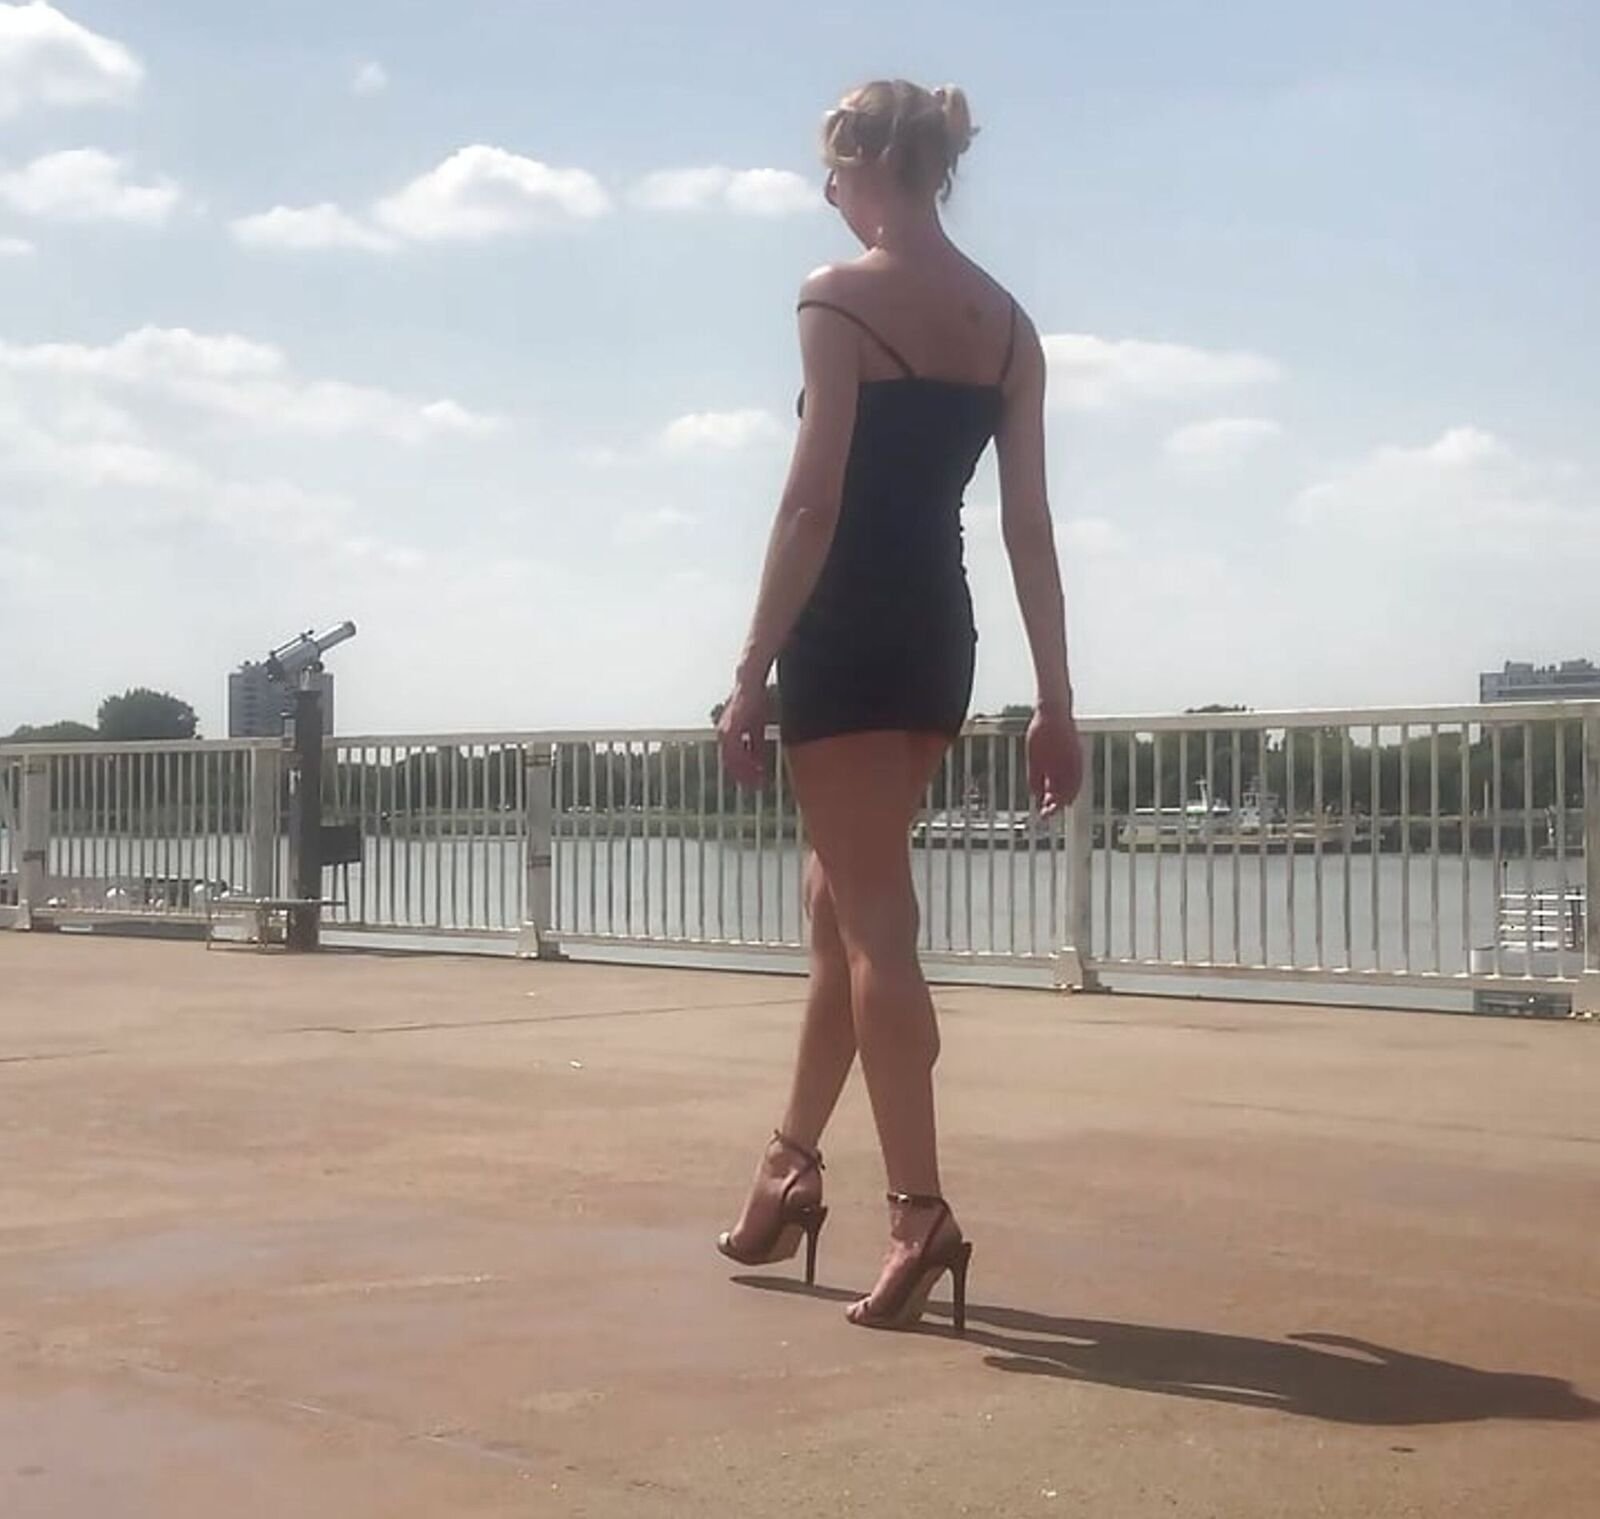 Black high heel sandals by the river